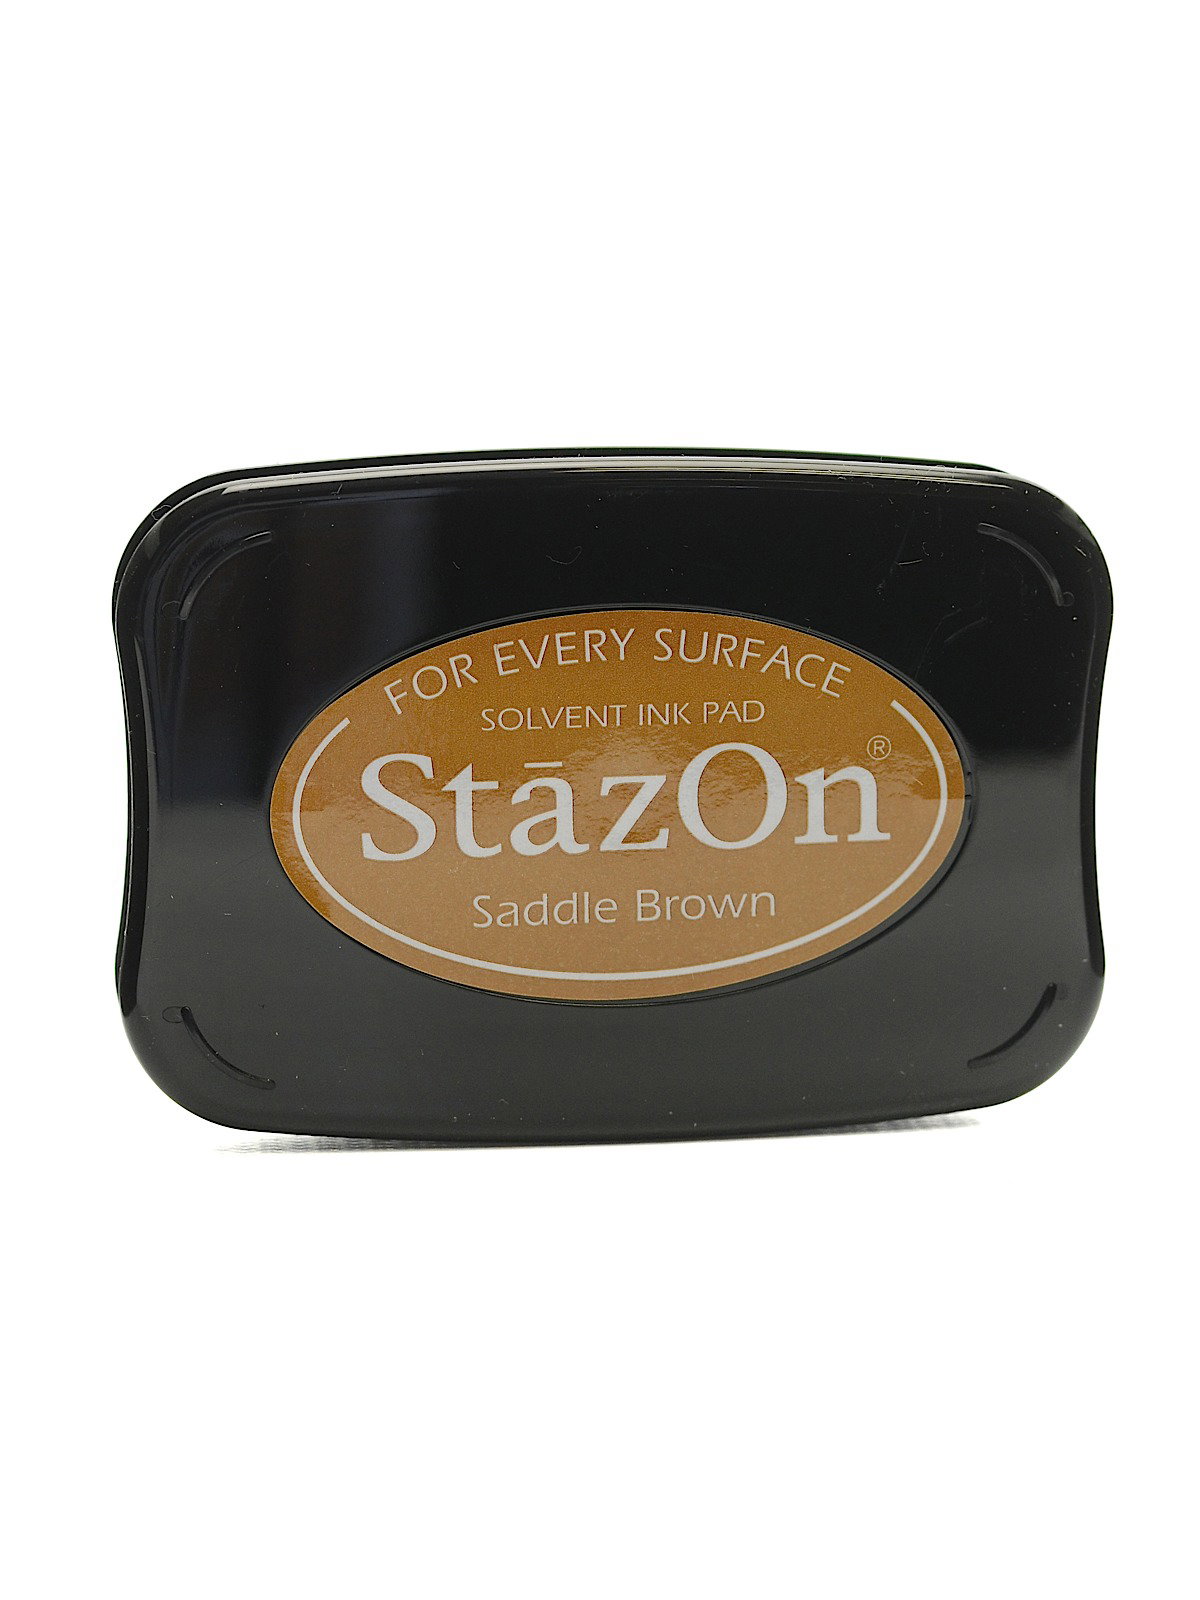 StazOn Solvent Ink Pad Forest Green